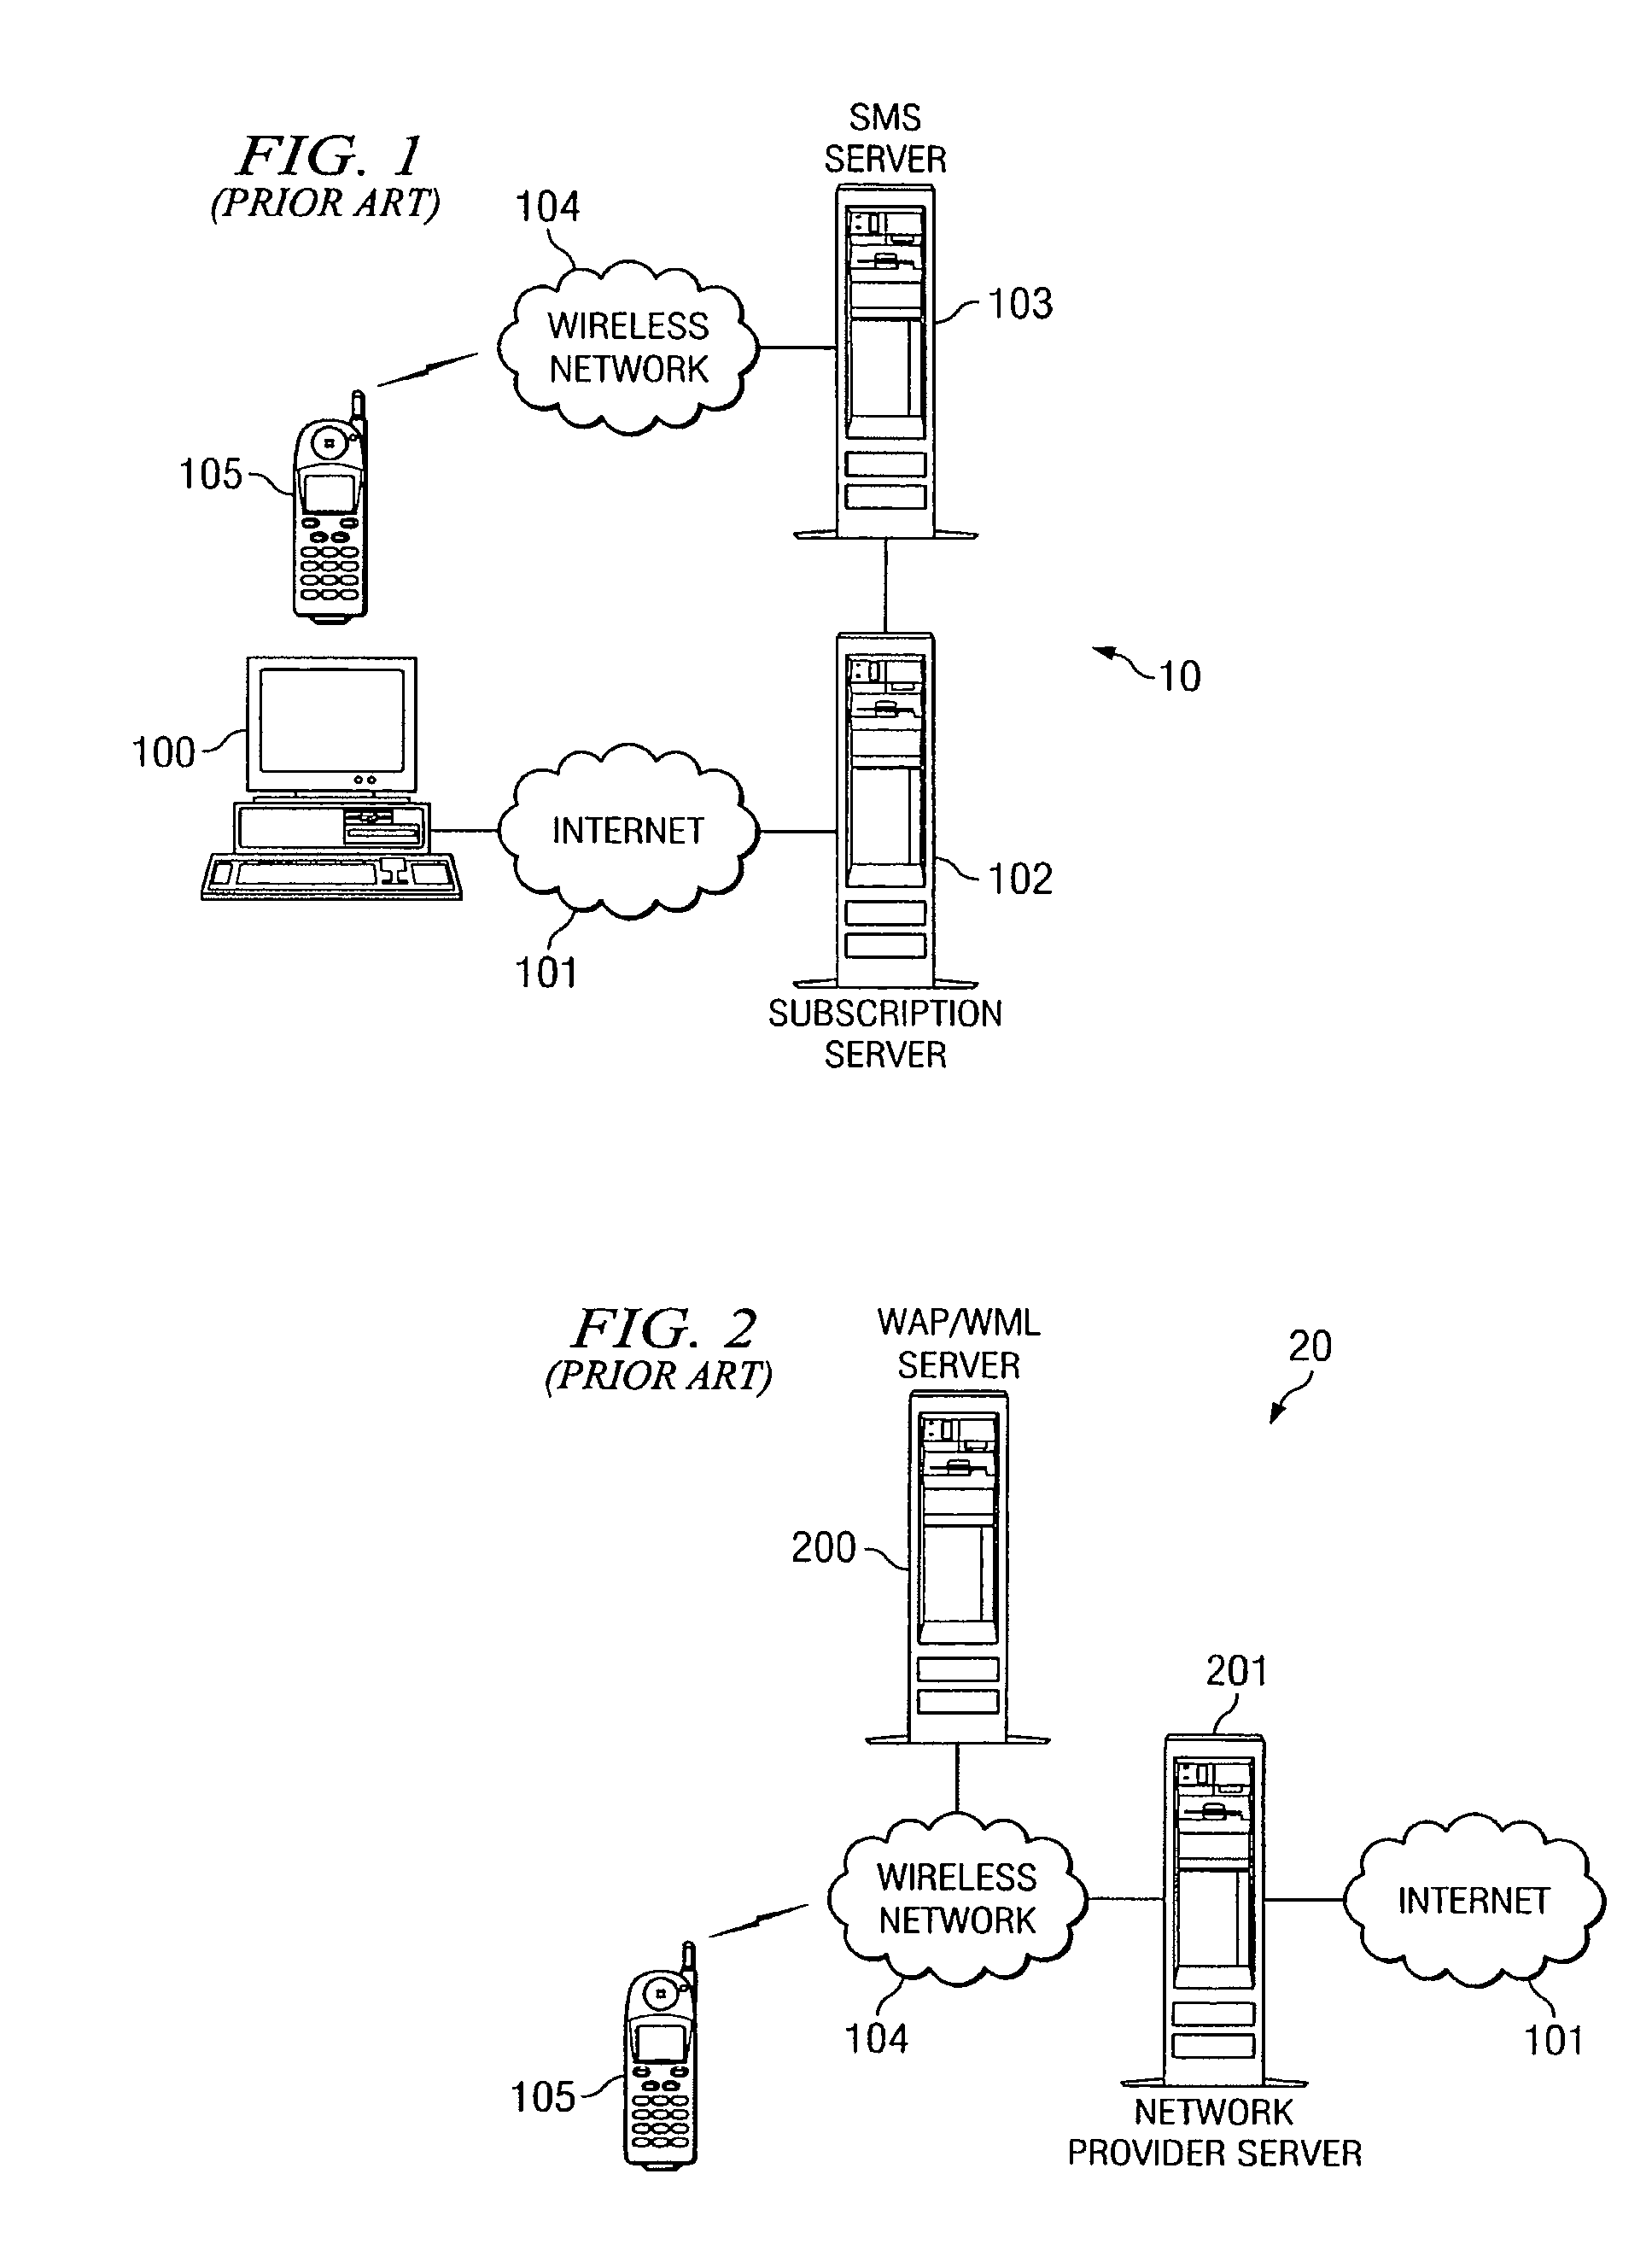 System and method for developing information for a wireless information system